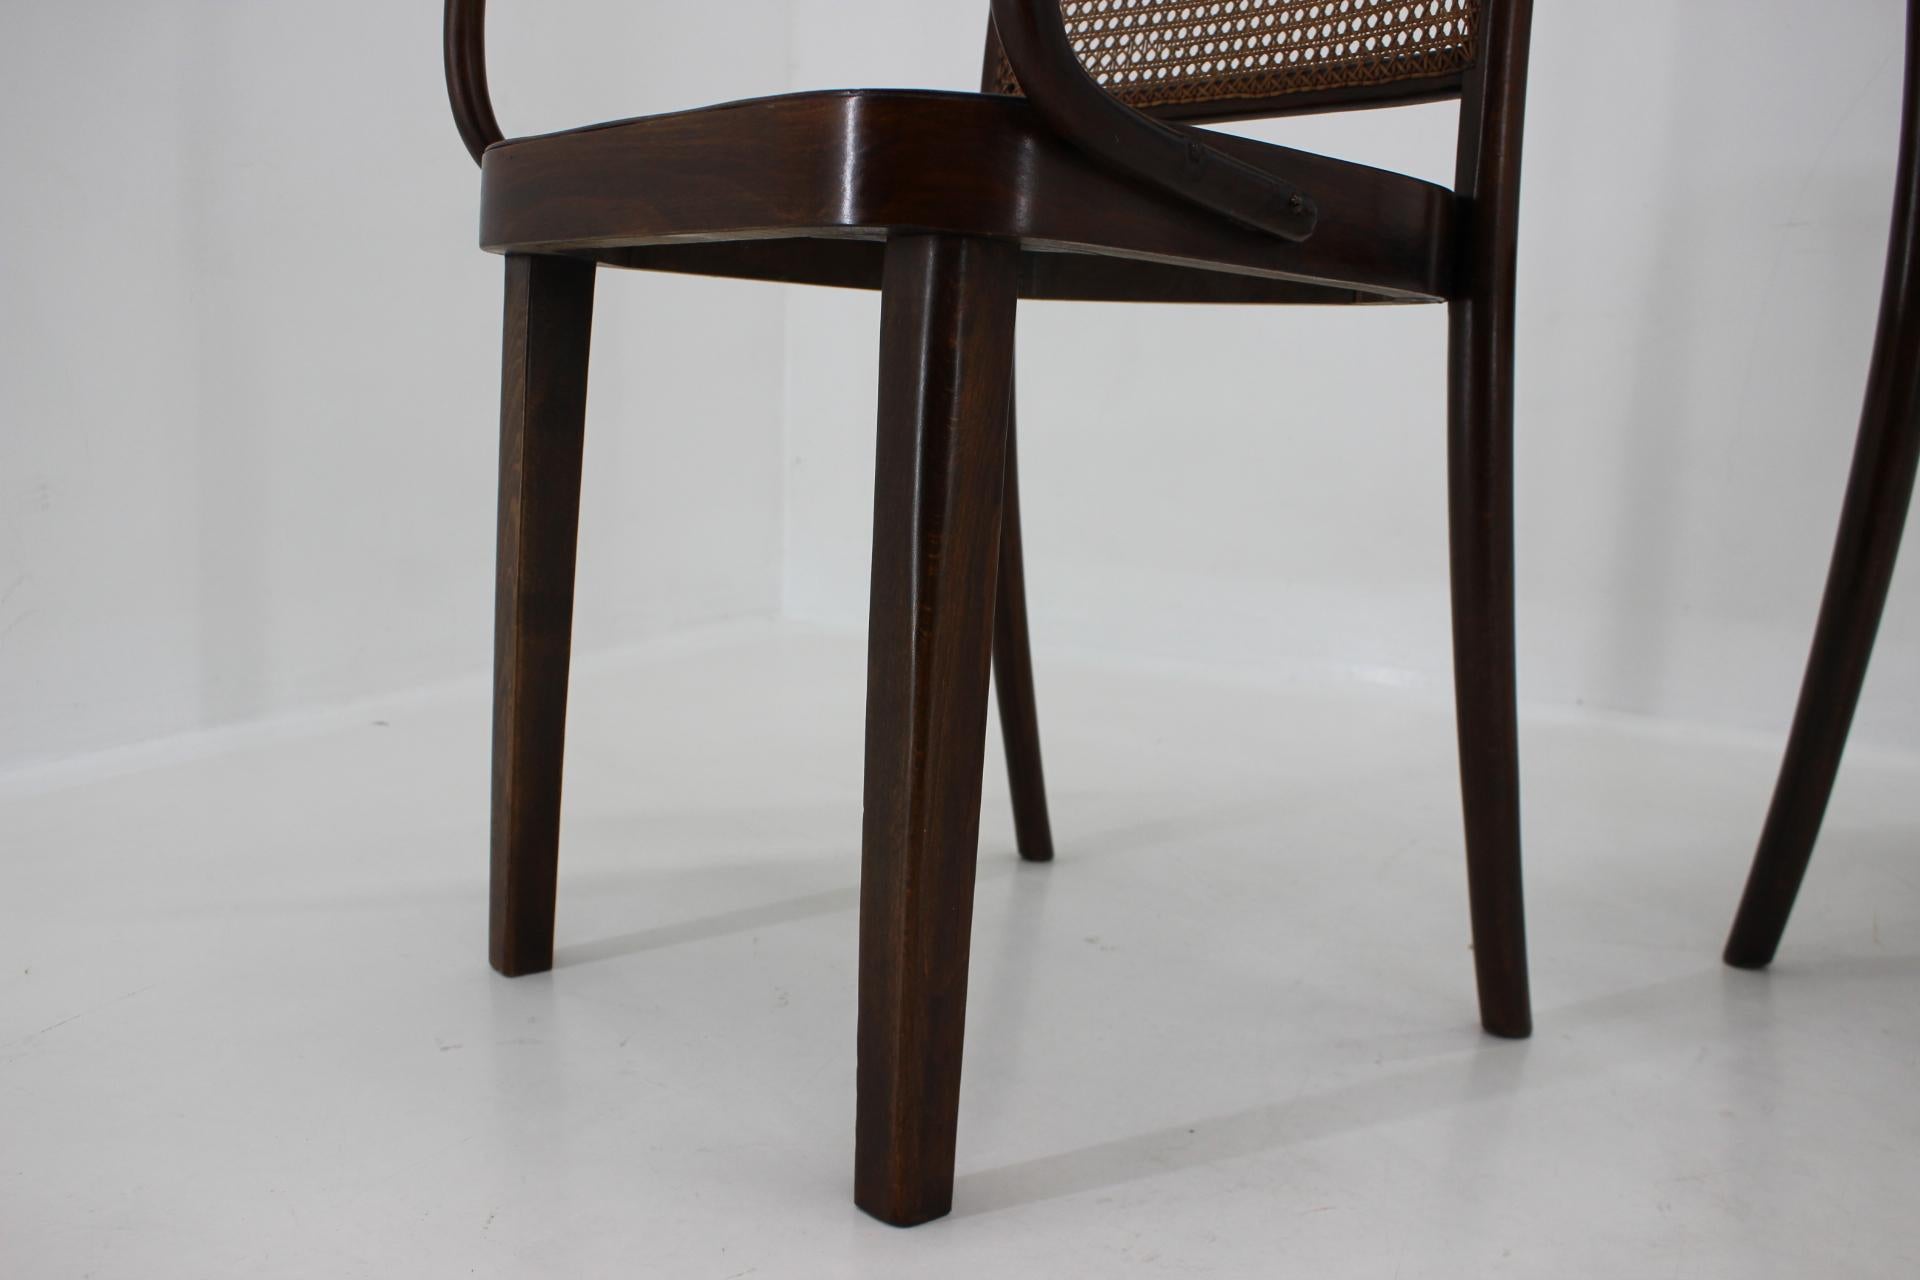 1920s Josef Hoffmann Bentwood Chairs, No. 811 for Thonet, Czechoslovakia For Sale 10